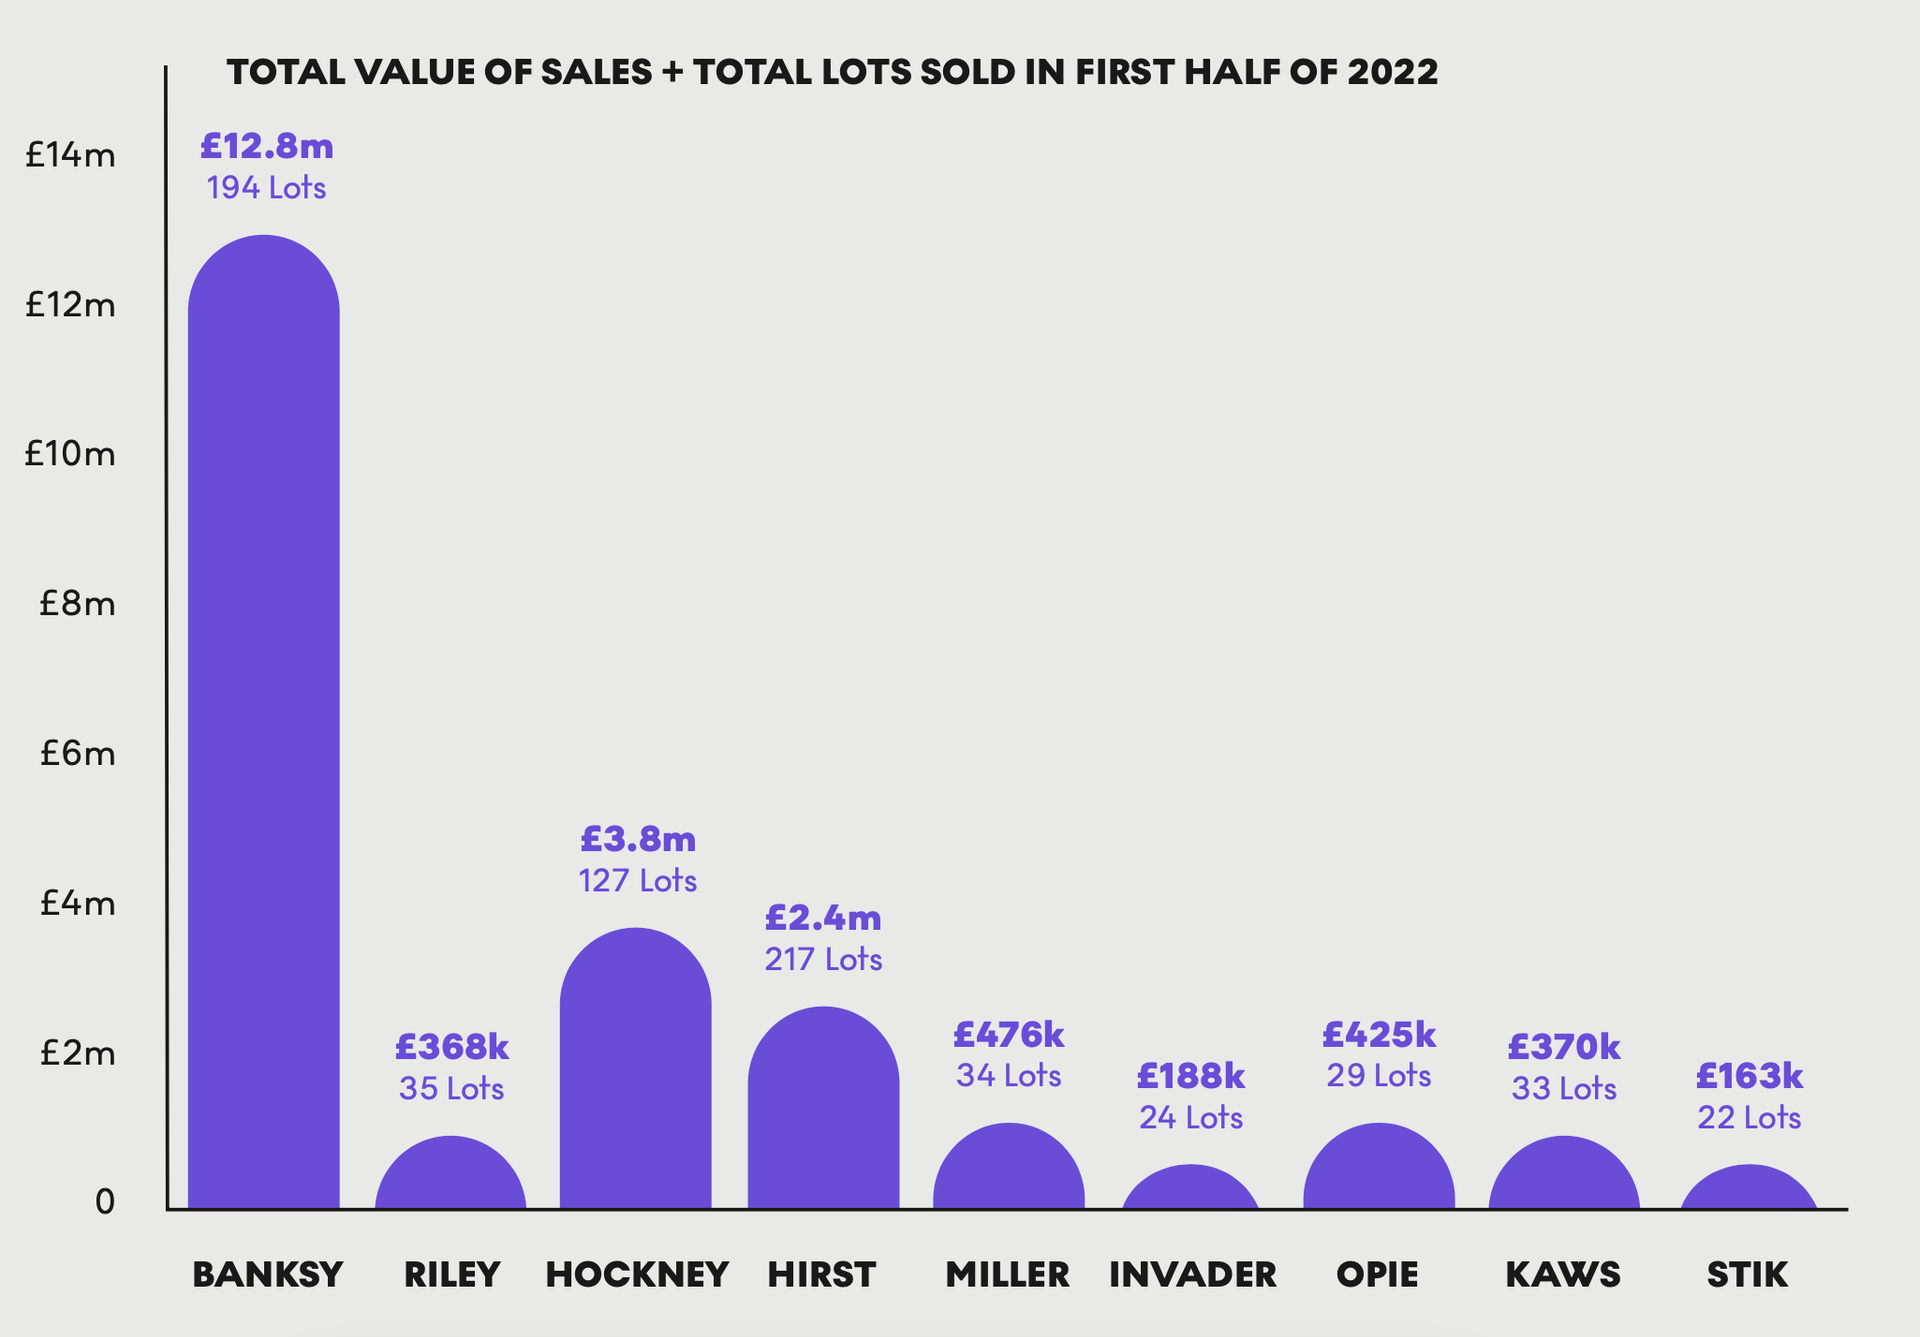 Total Value of Sales + Total Lots Sold in First Half of 2022